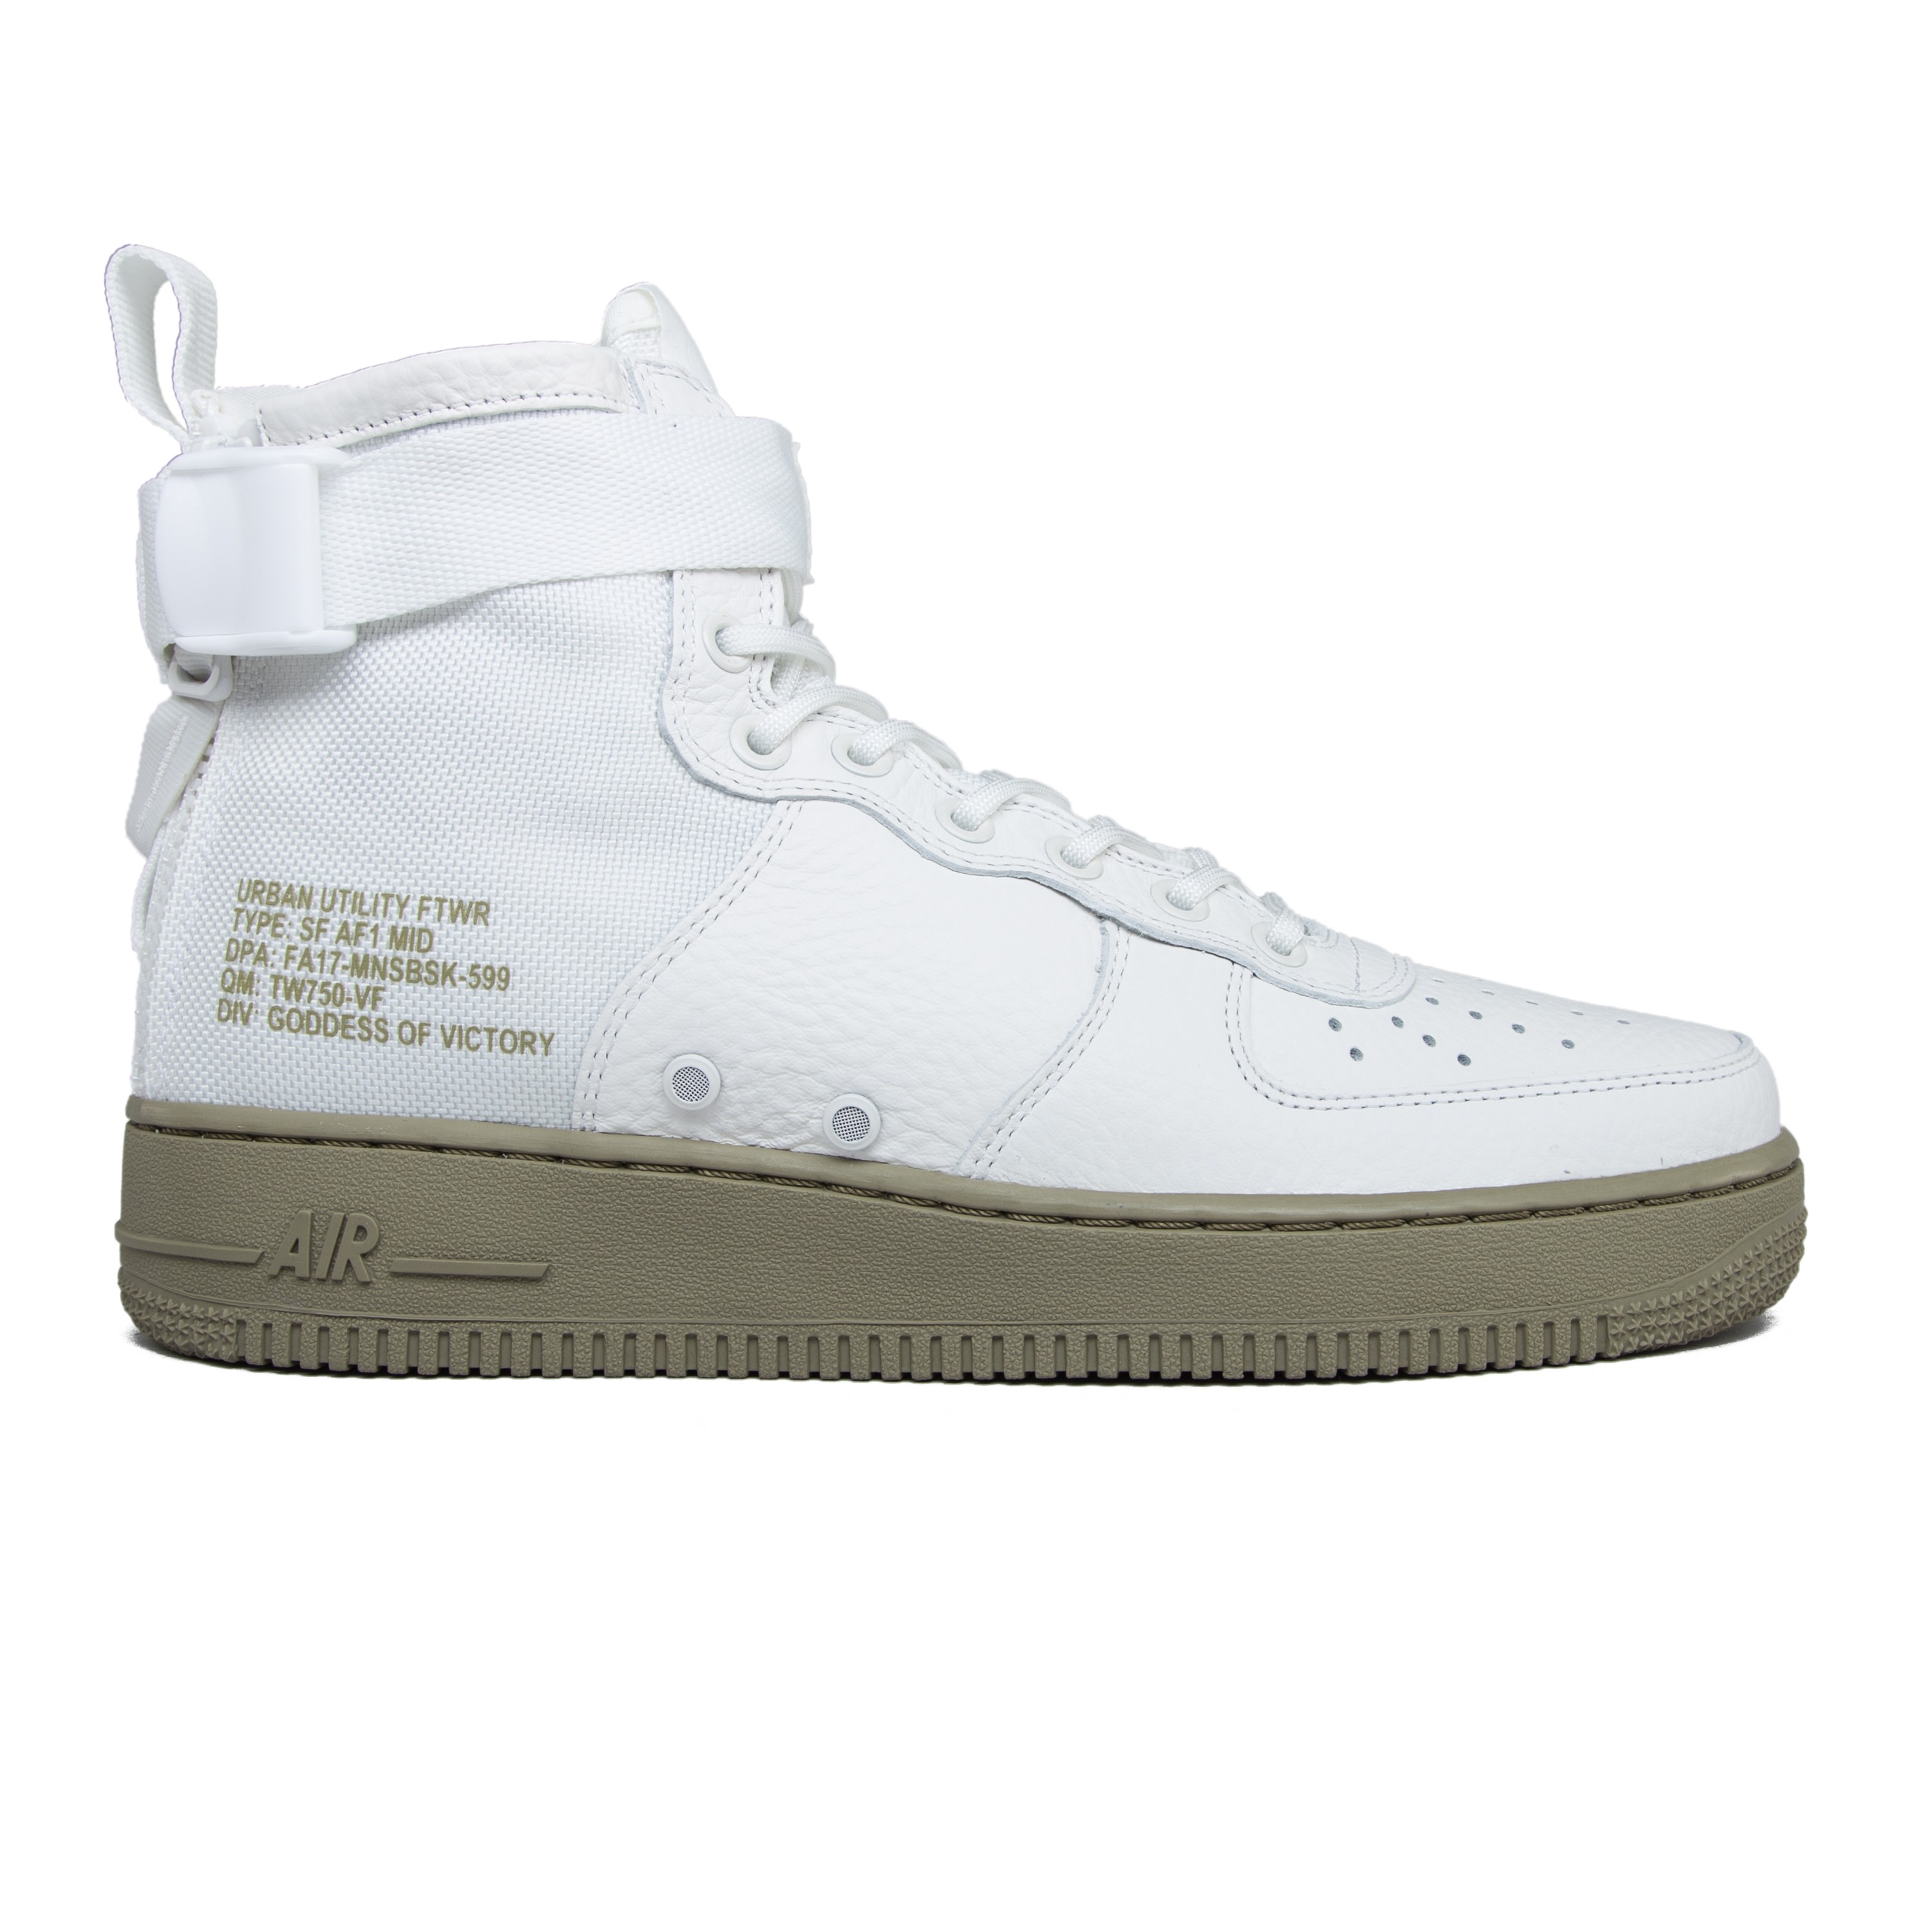 Nike Special Field Air Force 1 Mid 'Urban Utility' (Ivory/Ivory-Neutral ...